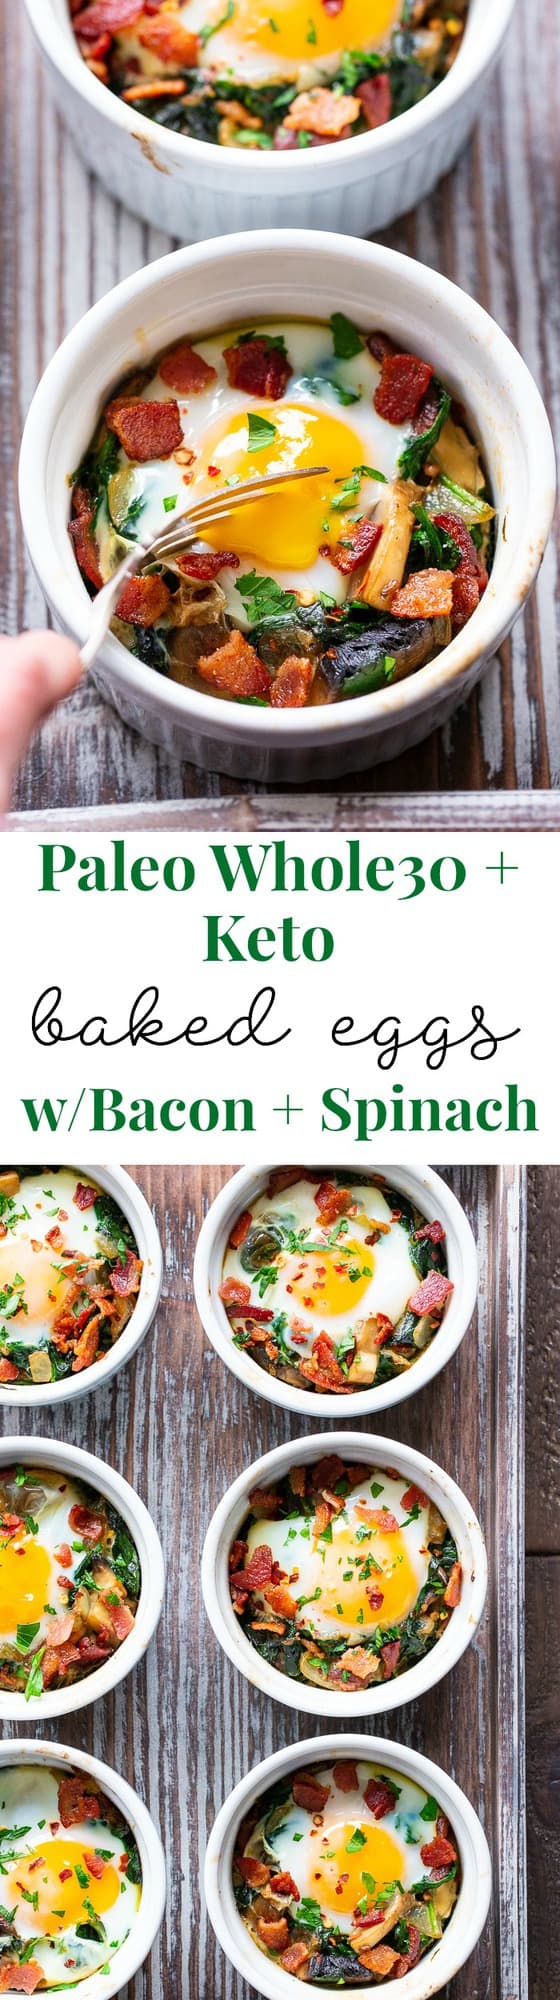 Made in single serving ramekins, these baked eggs are packed with savory goodies and flavor!   Great for weekend brunches and make-ahead friendly for weekdays.  Paleo, Whole30 compliant and keto friendly. 